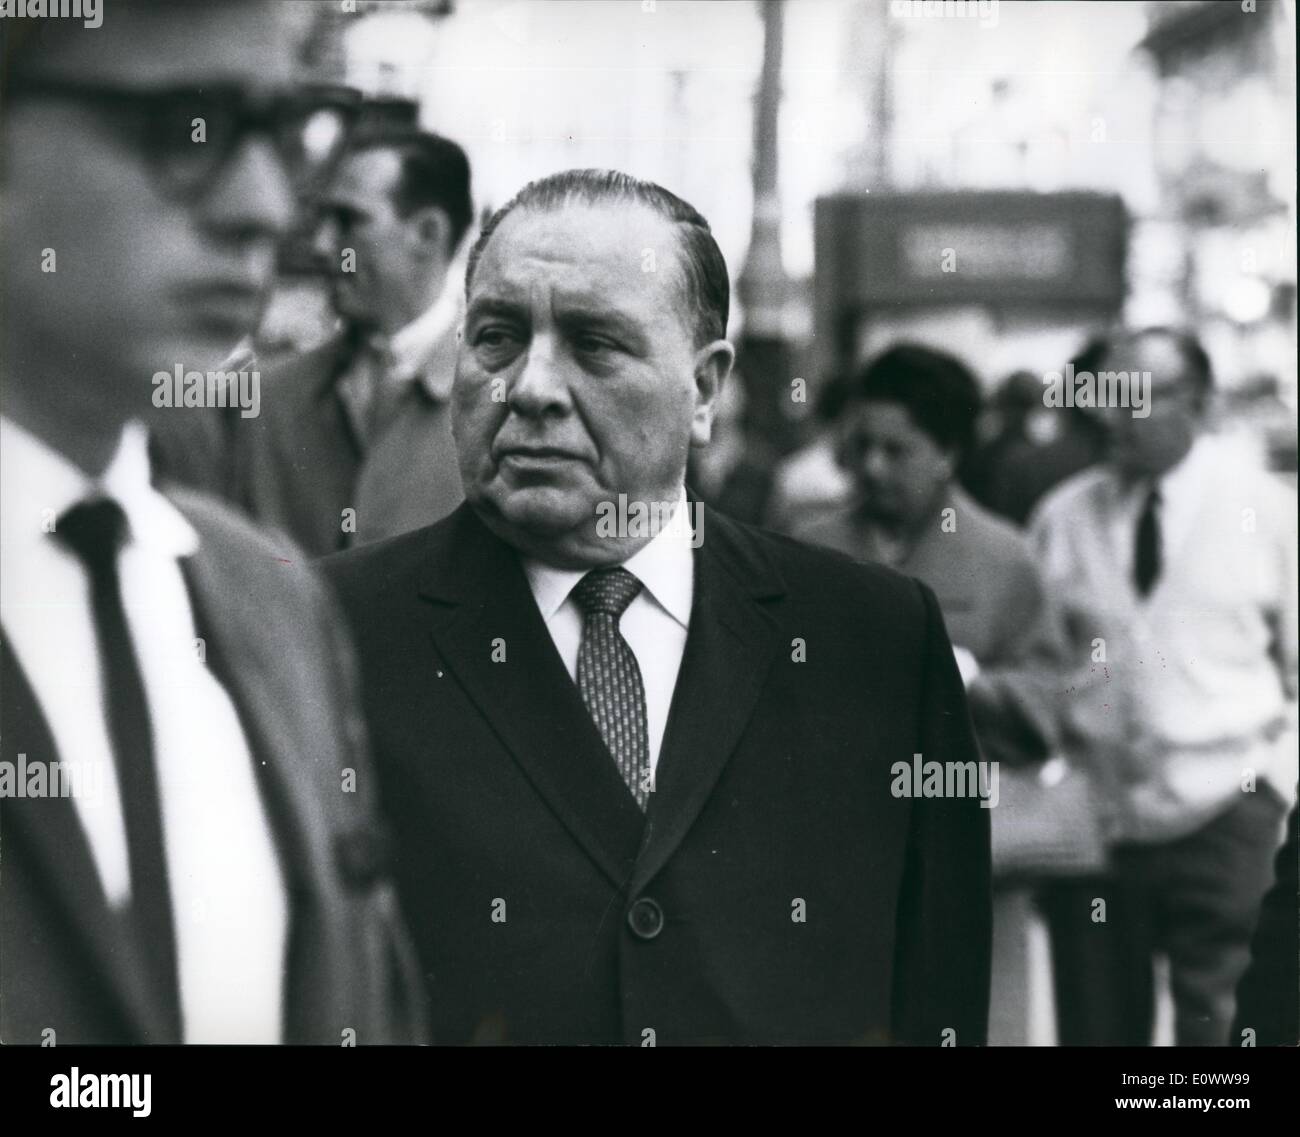 May 05, 1964 - Mayor of Chicago in London : Mr.Richard Dally, Mayor of Chicago, U.S.A. is in London on a visit. Photo shows A close-up of Mr.Dally among the crowds in a London street yesterday. Stock Photo